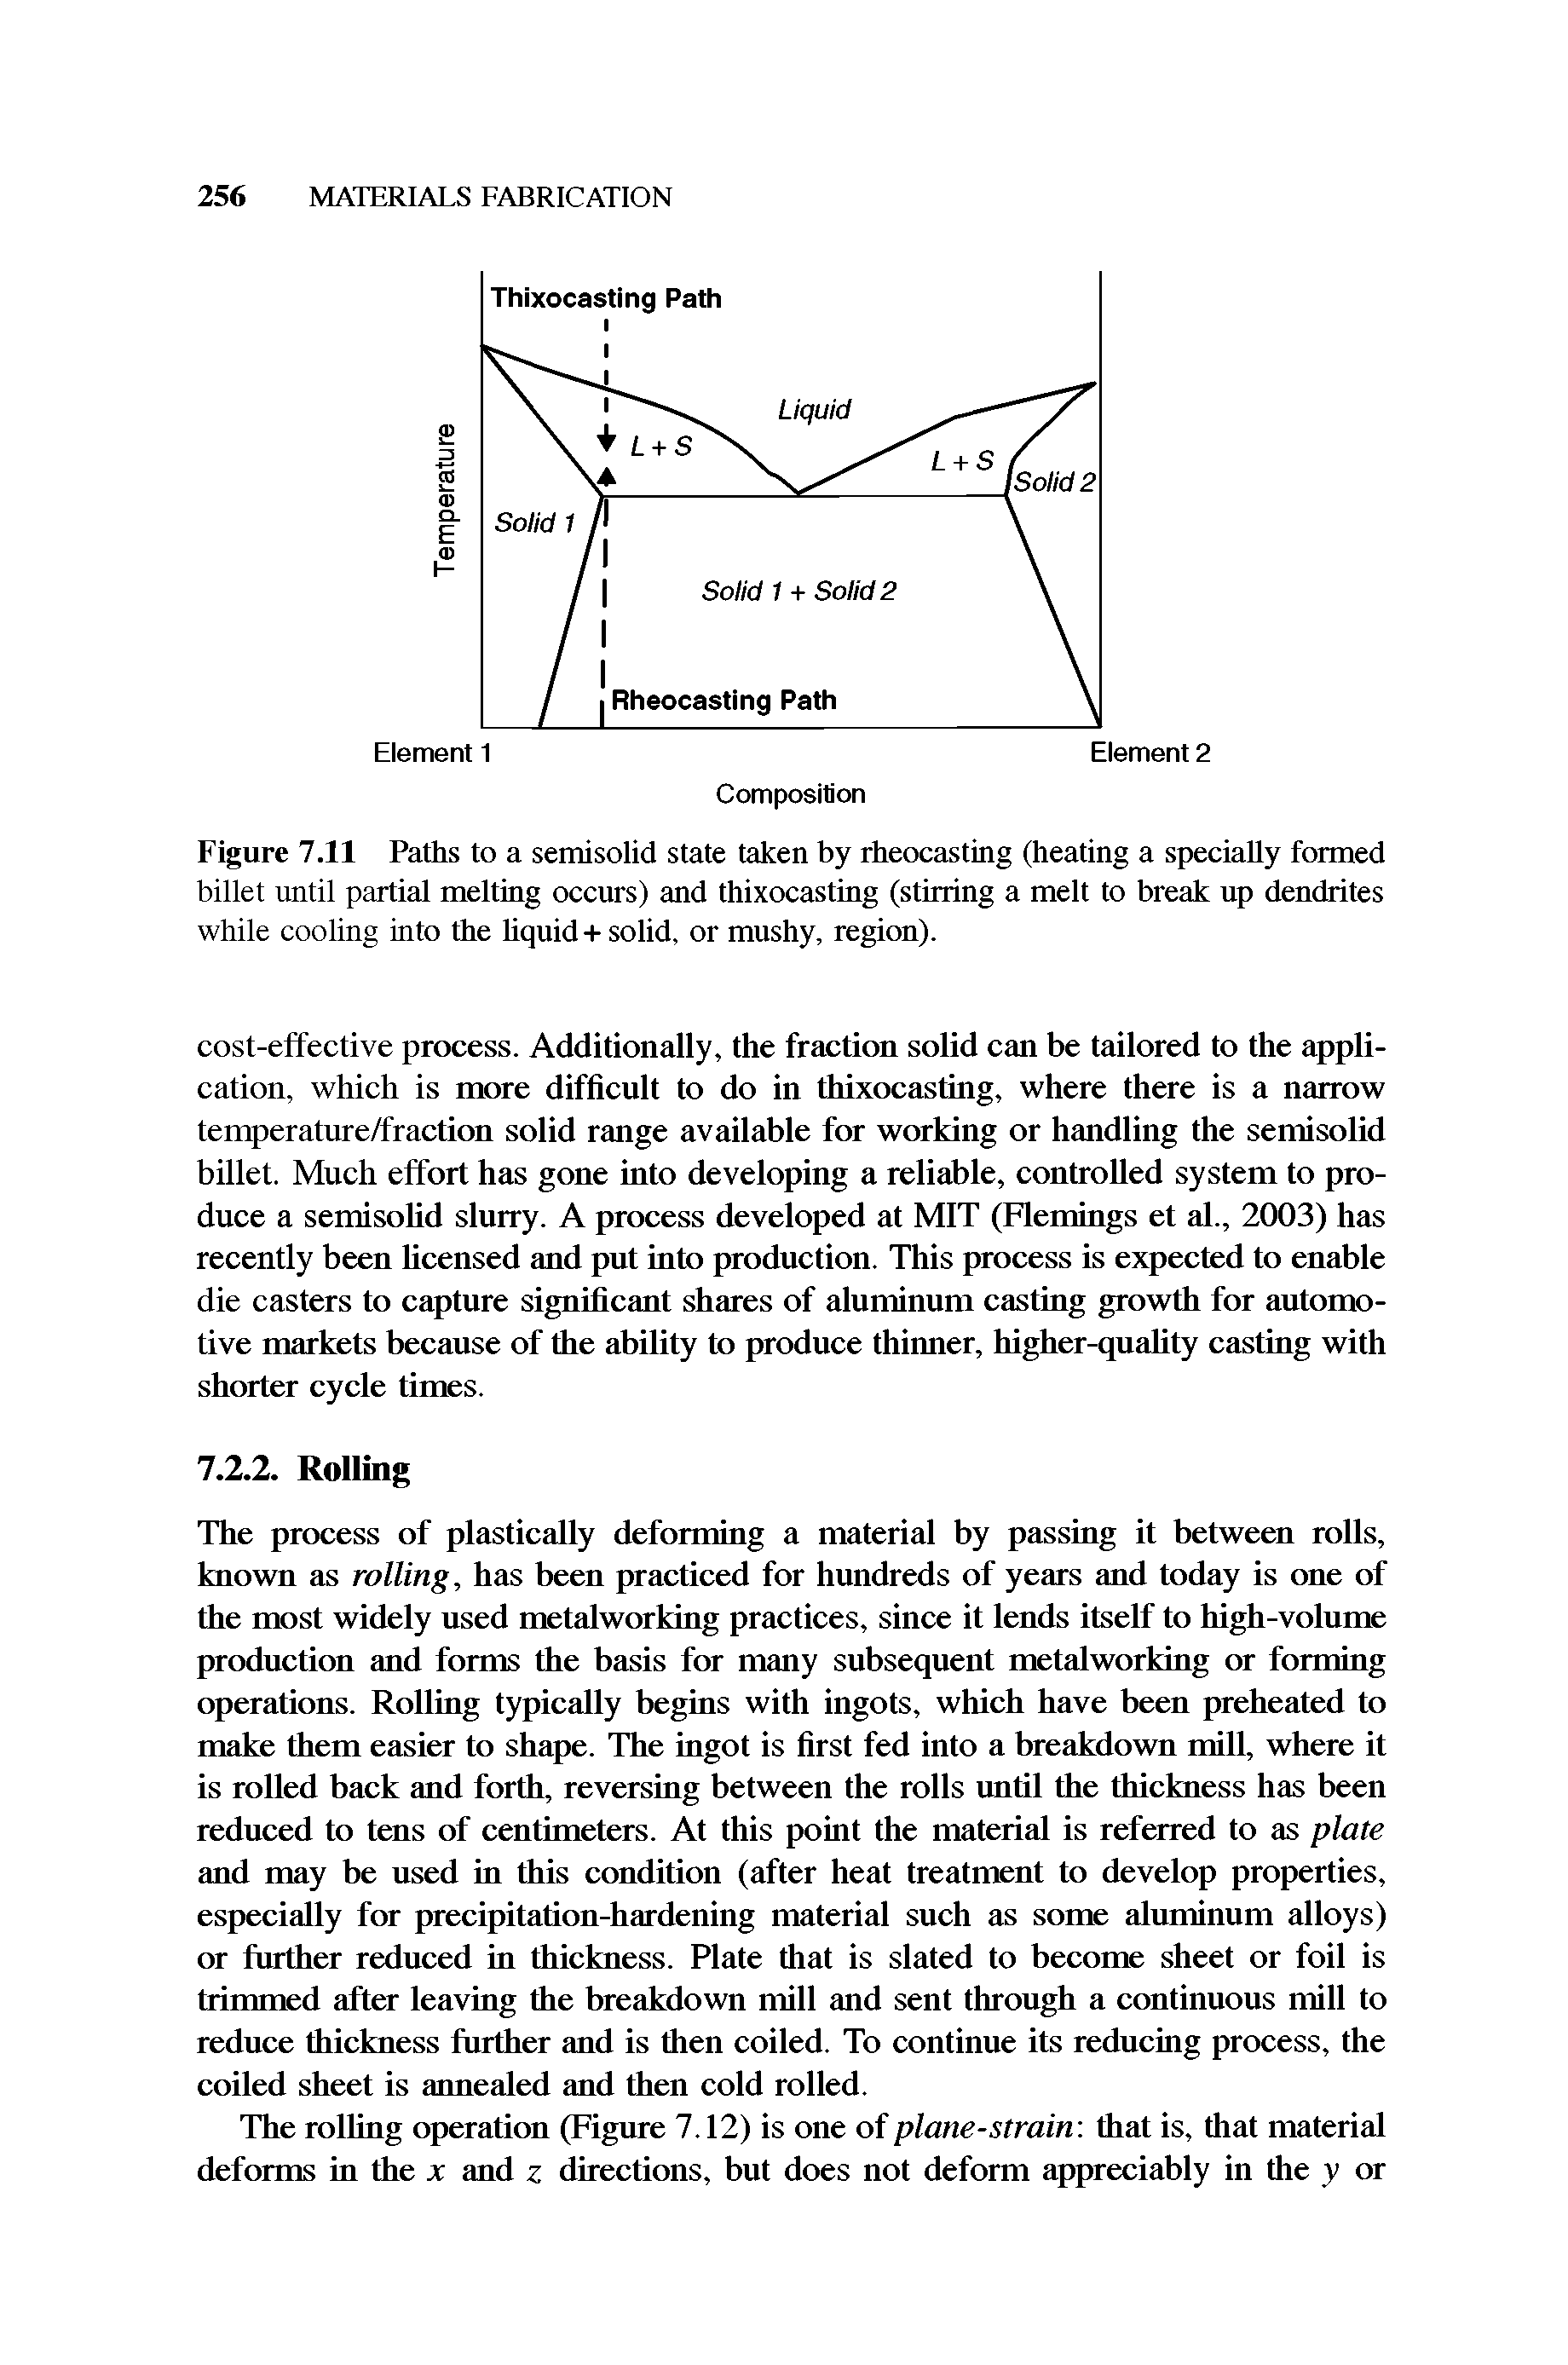 Figure 7.11 Paths to a semisolid state taken by rheocasting (heating a specially formed billet until partial melting occurs) and thixocasting (stirring a melt to break up dendrites while cooling into the liquid + solid, or mushy, region).